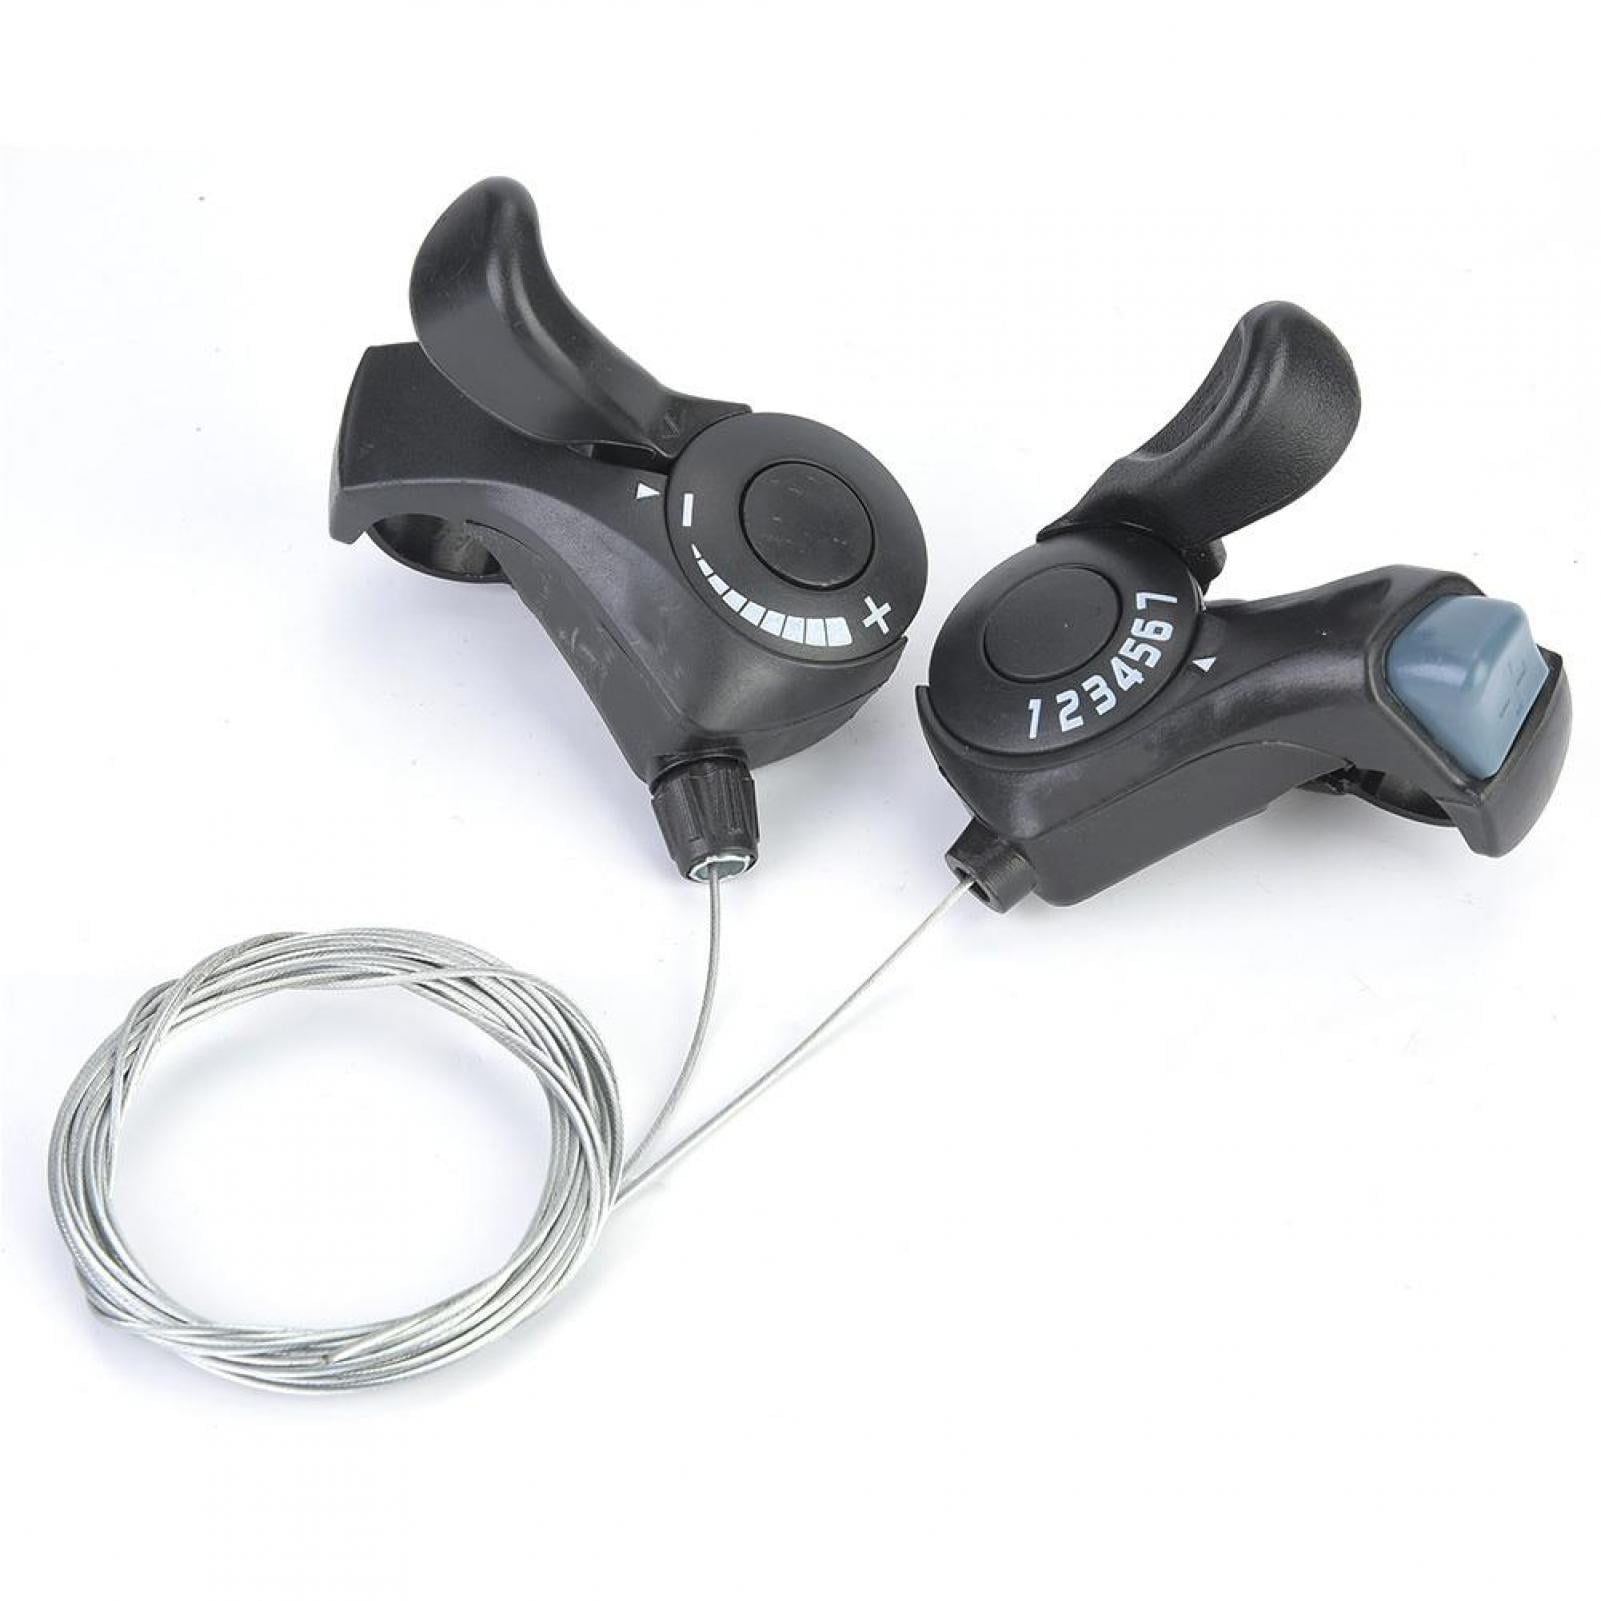 MEGHNA Bike Shift Lever Left SL-TX30-LN Speed and Right SL-TX30-7R Speed Mountain Bicycle Shifter